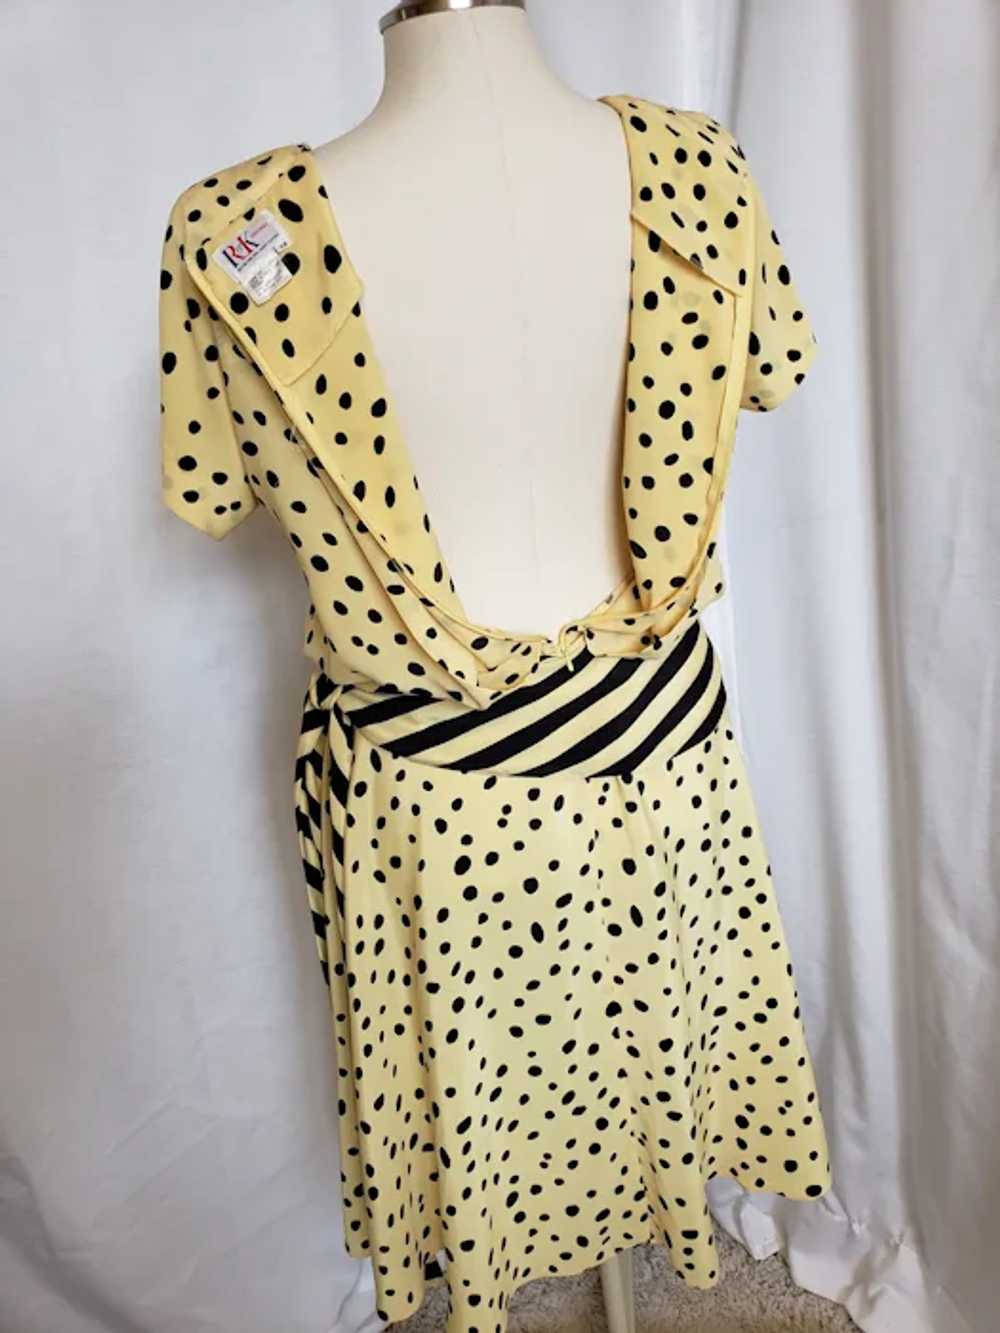 Sunny Yellow and Black Dots 'n Stripes Dress - image 5